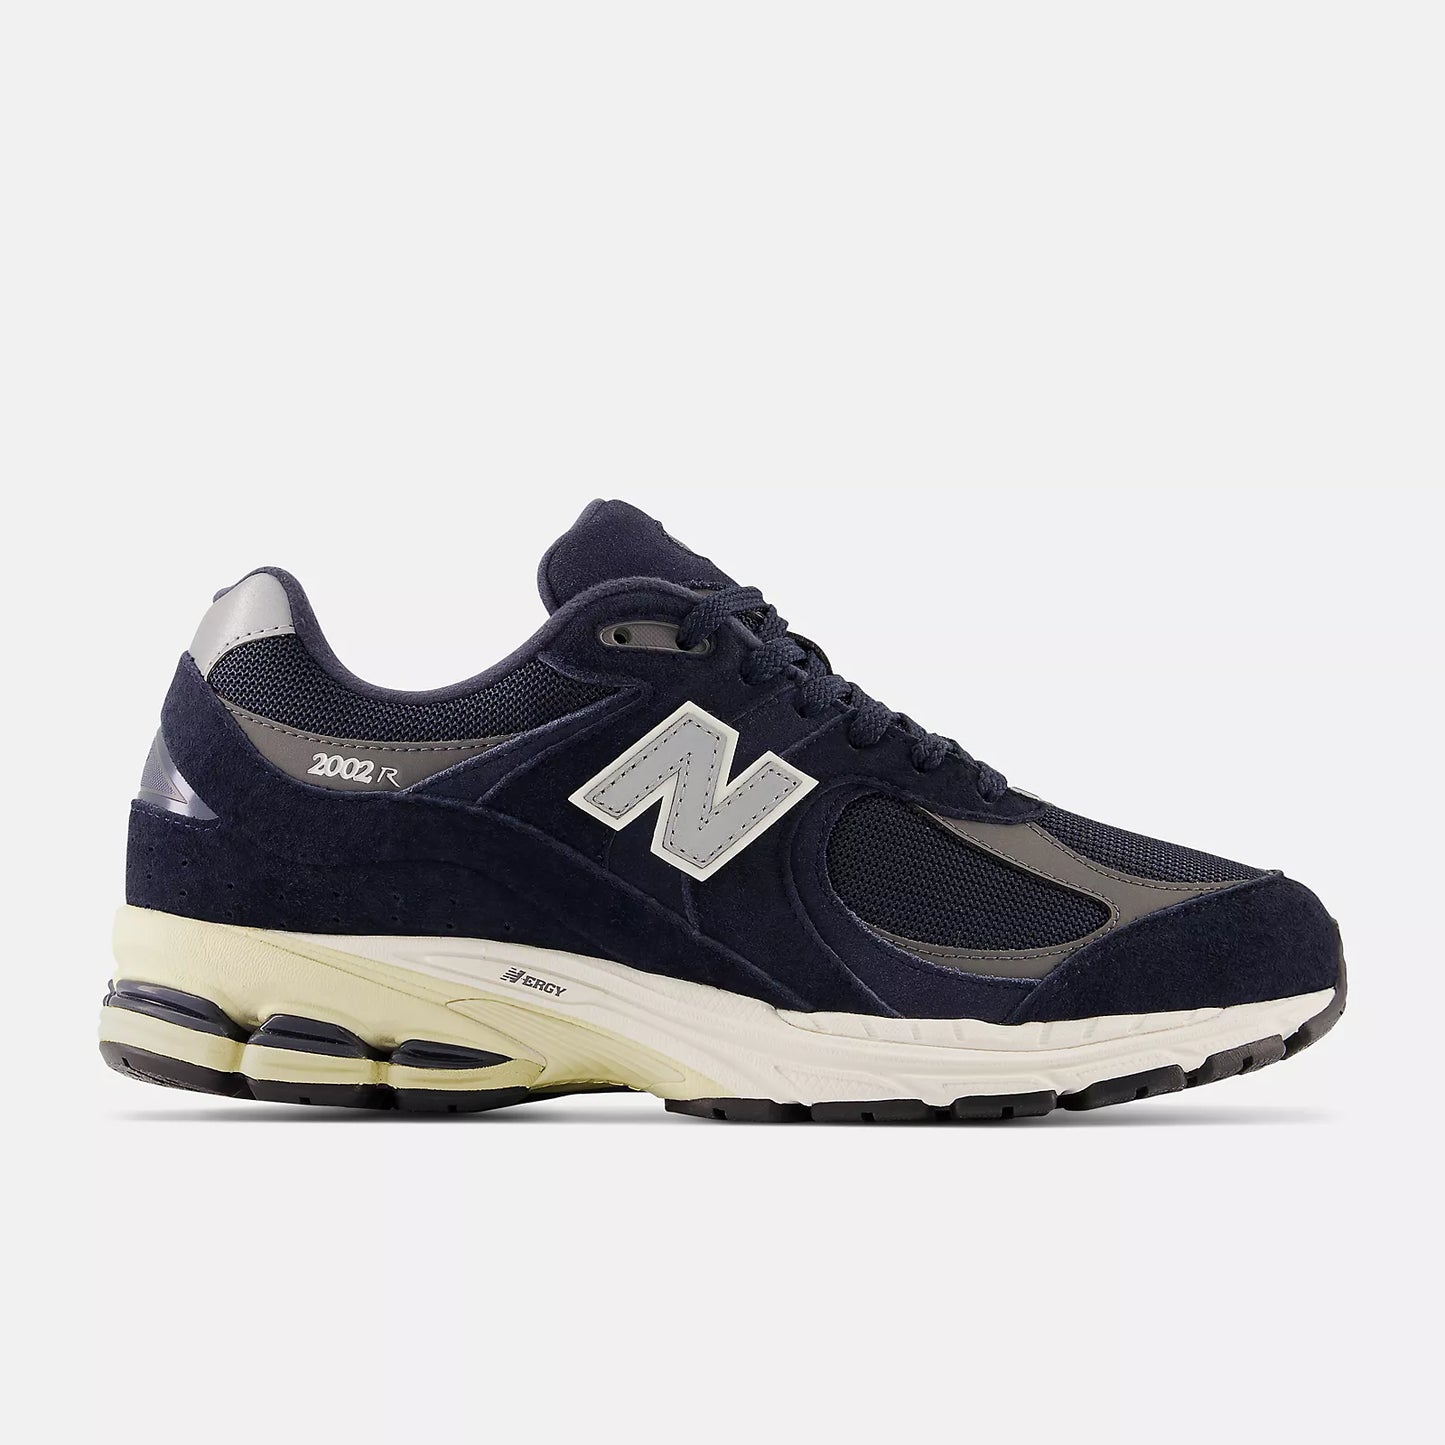 NEW BALANCE M2002RCA - Eclipse with castlerock and silver metallic